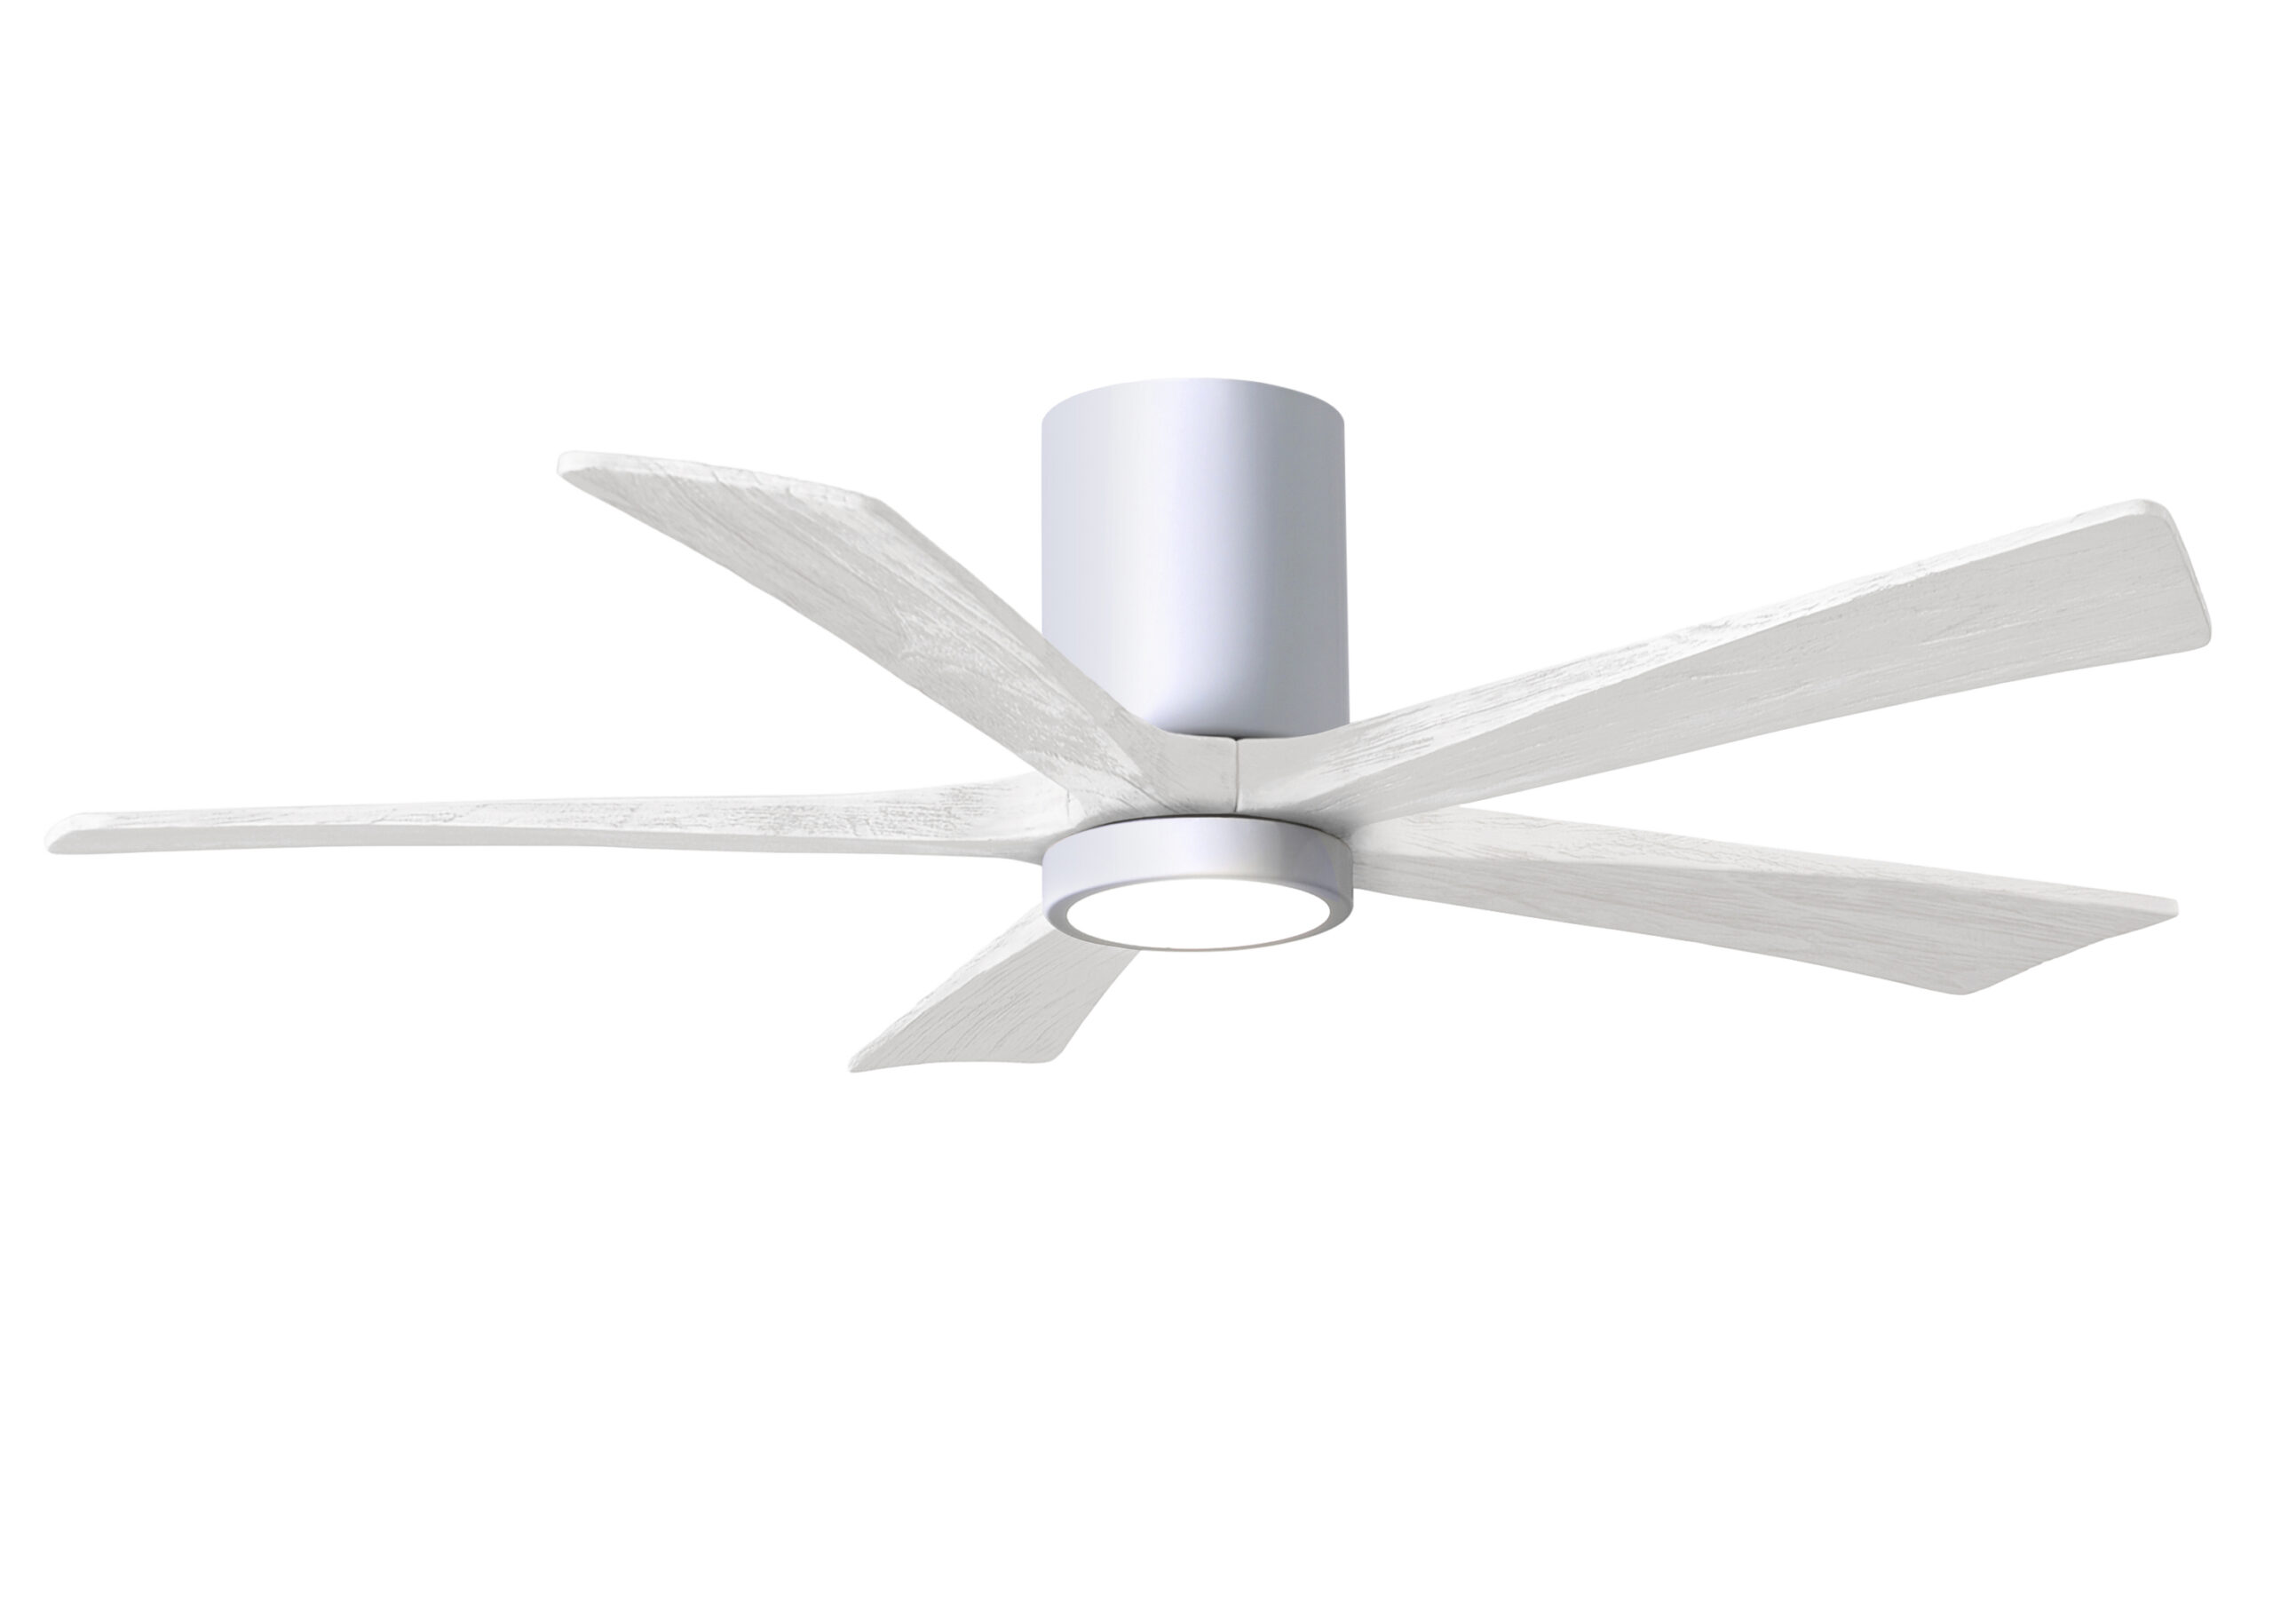 Irene-5HLK Ceiling Fan in Gloss White Finish with 52